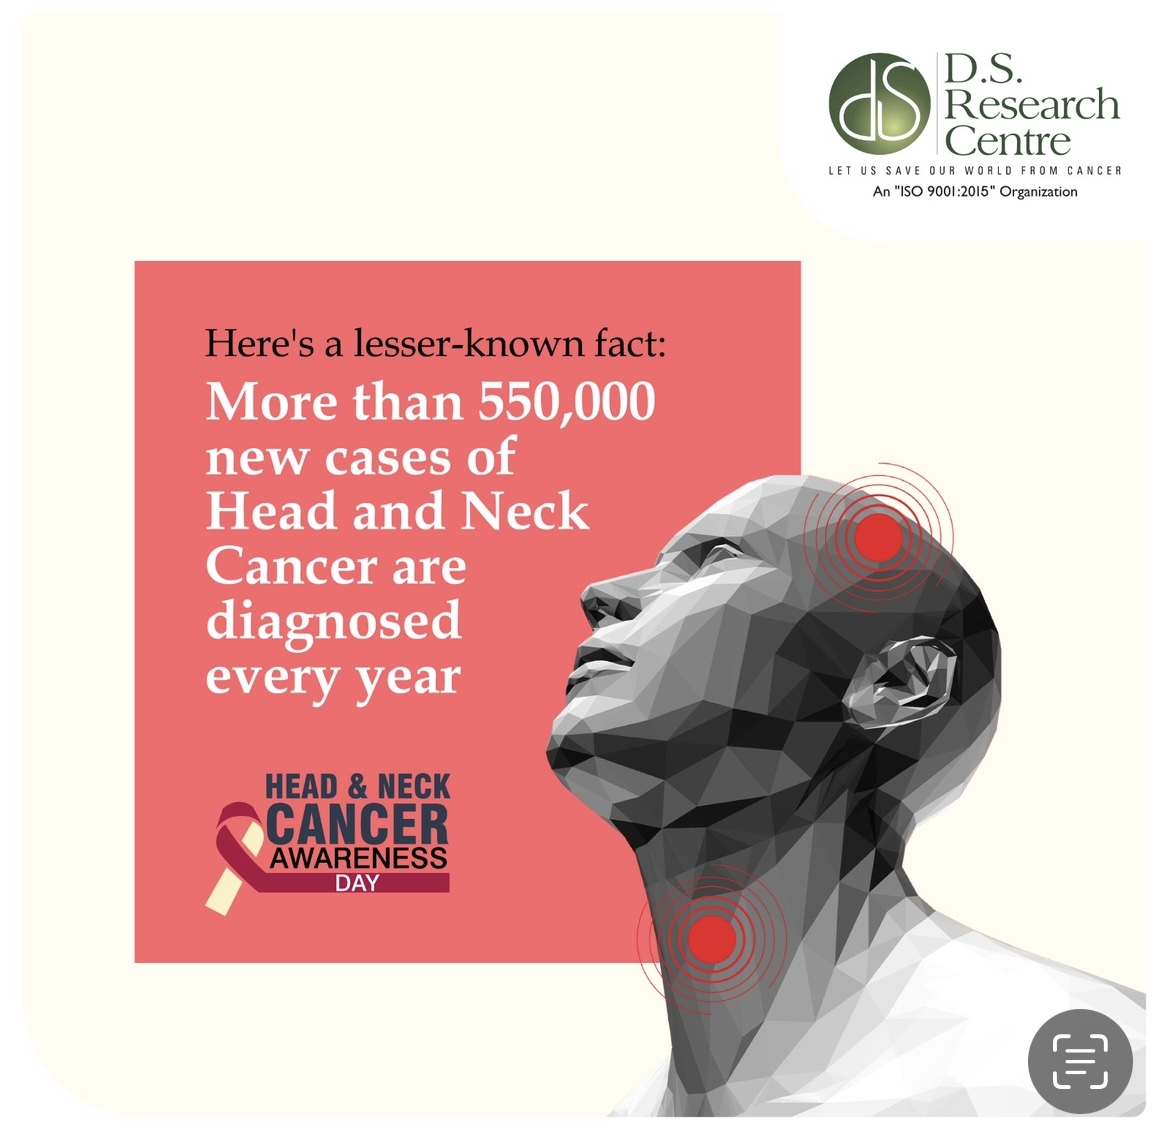 Harnessing Ancient Ayurvedic Wisdom D.S. Research Centre's Nutrient Energy Treatment Transforms Lives of Advanced Stage Head and Neck Cancer Patients